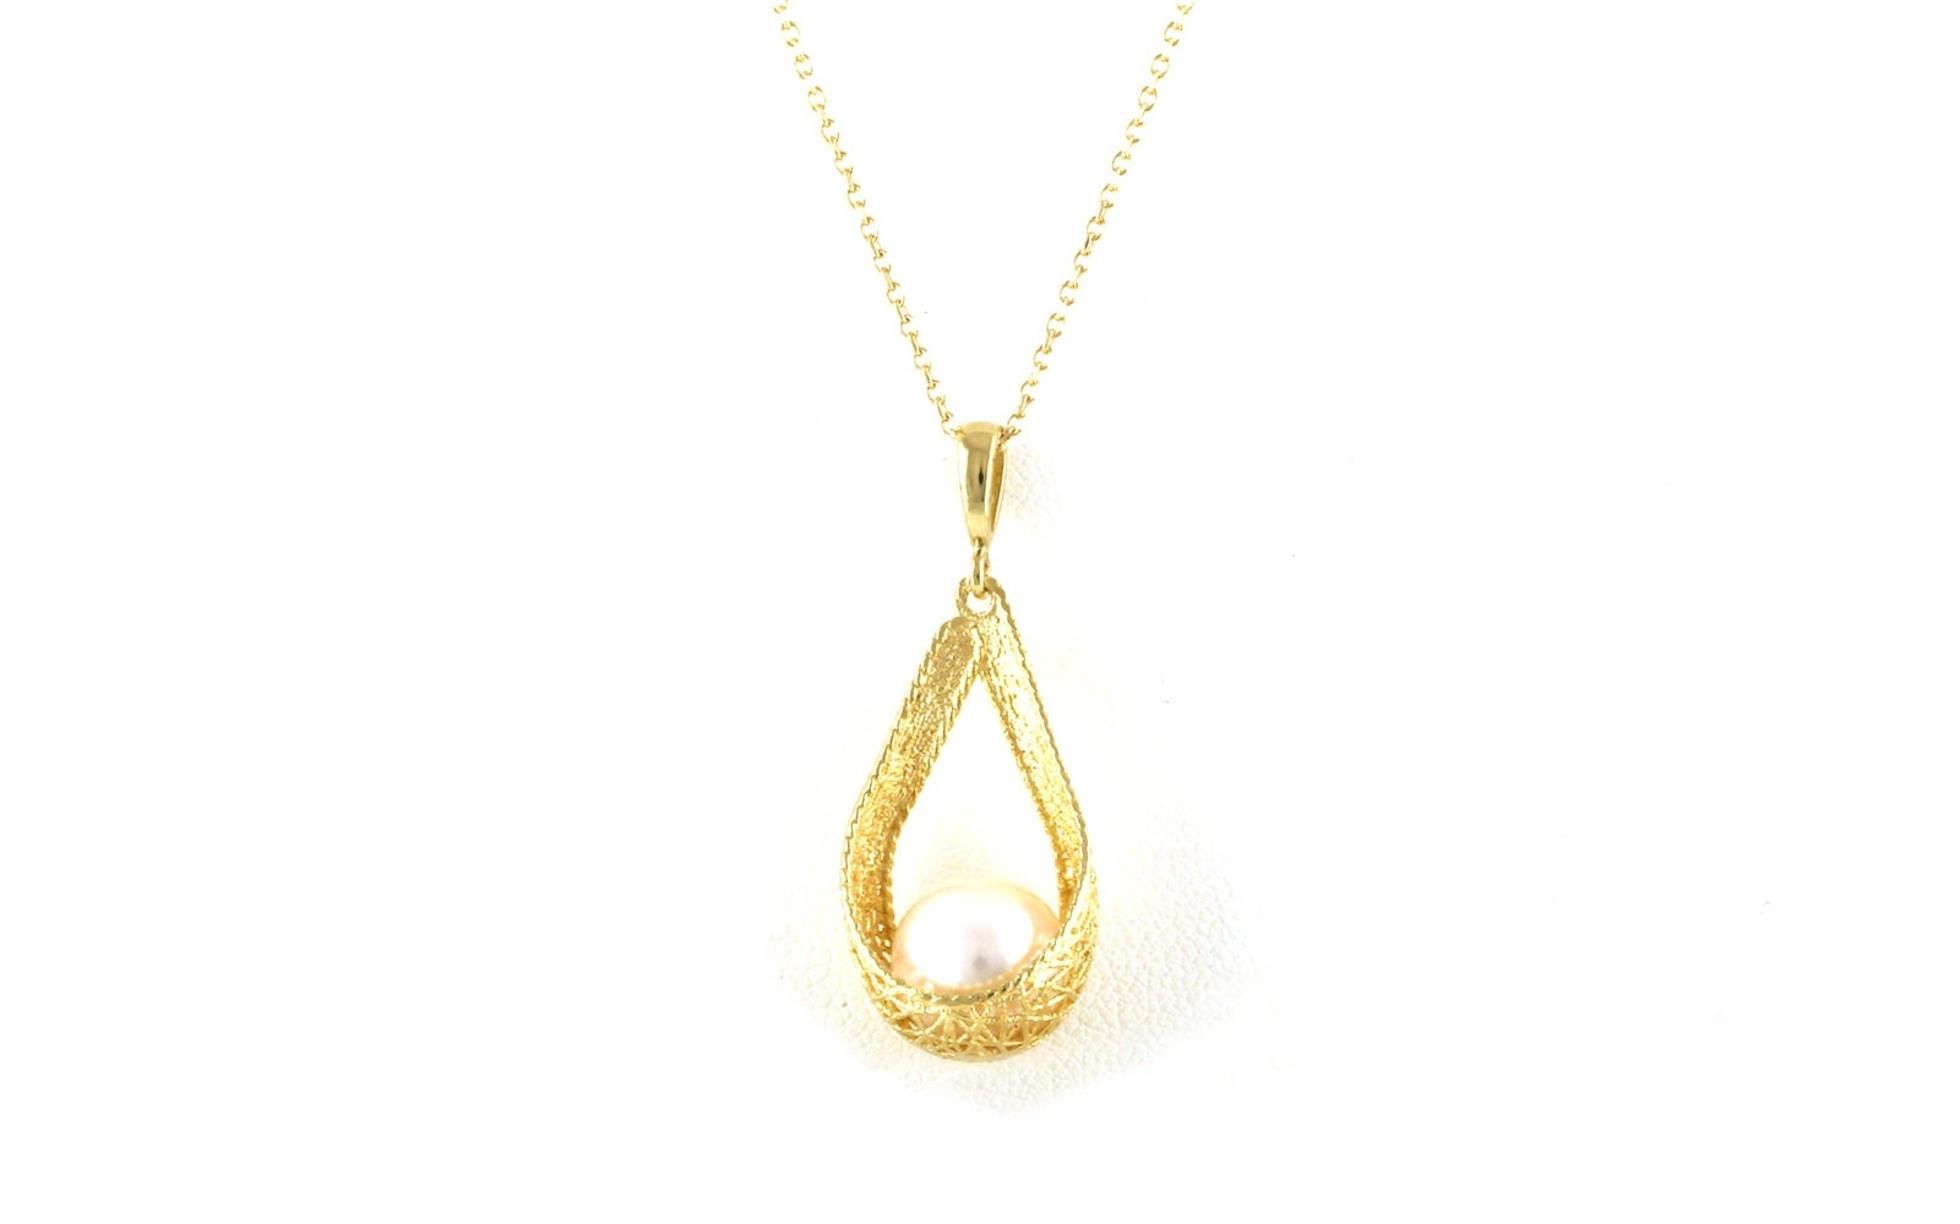 Woven Mesh Basket Solitaire Pearl Necklace in Yellow Gold